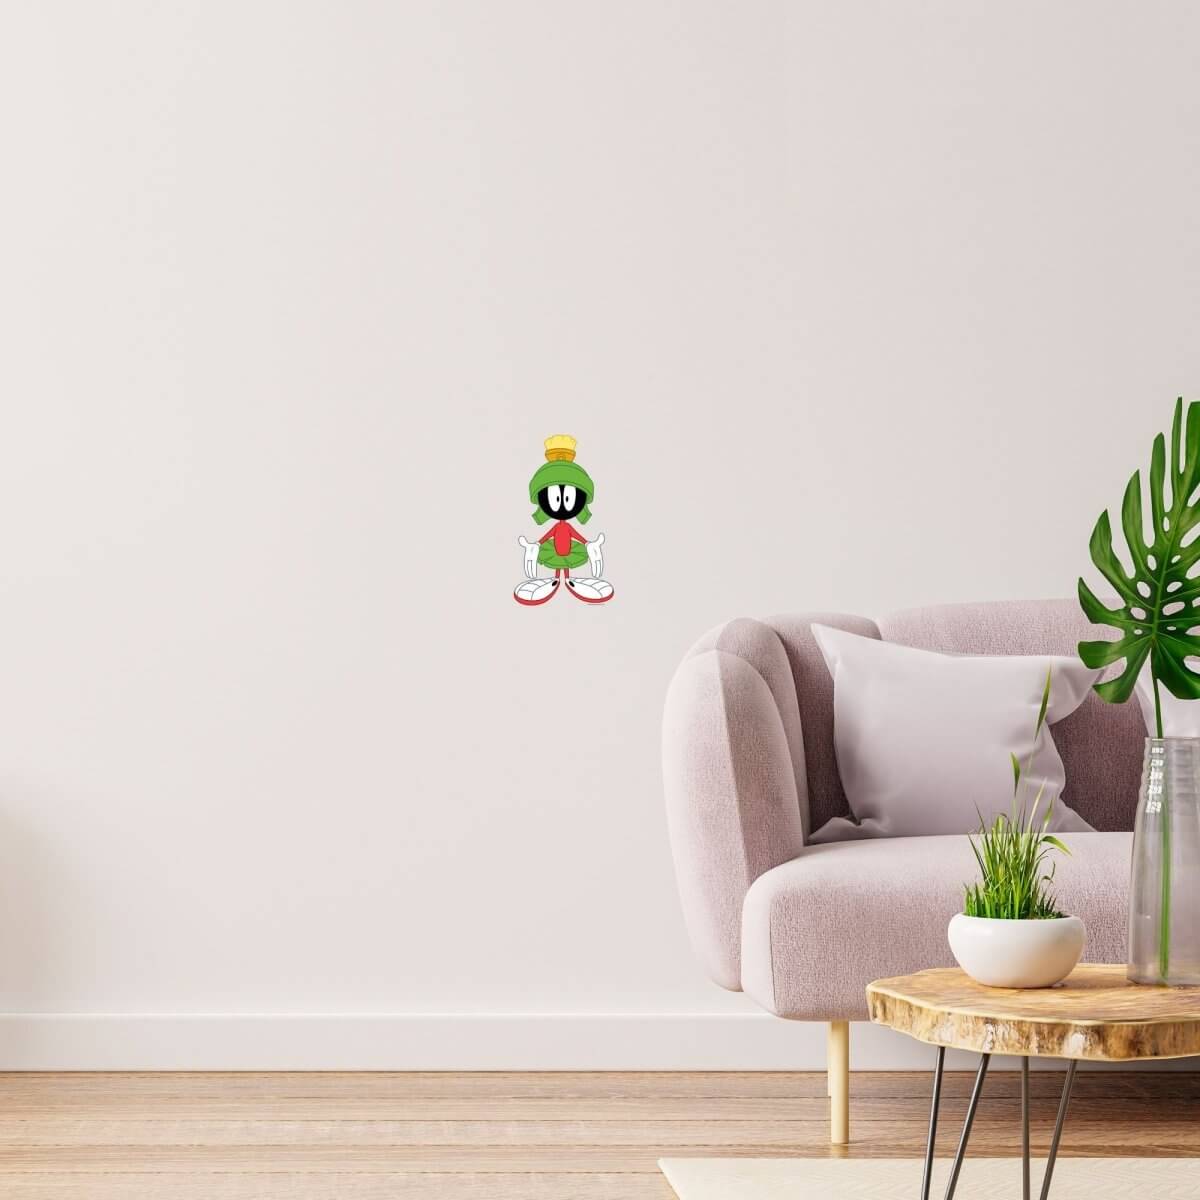 Kismet Decals Looney Tunes Marvin Confused Licensed Wall Sticker - Easy DIY Home & Kids Room Decor Wall Decal Art - Kismet Decals